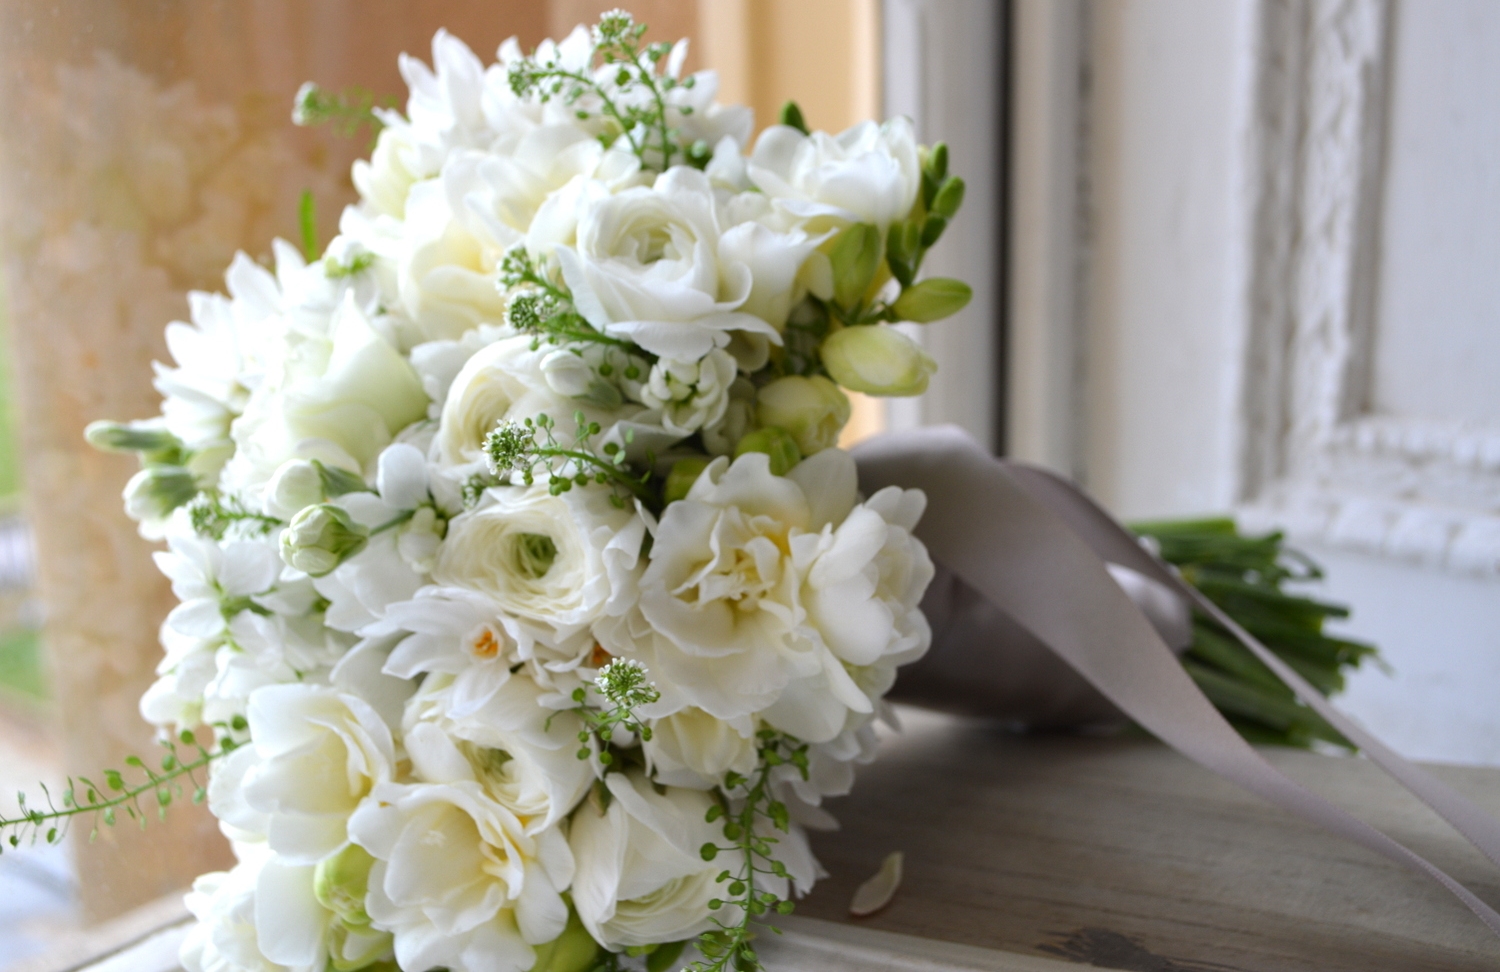 All white winter, wedding Bouquet with Ranuncula, Narcissi, Freesia & Hellebores